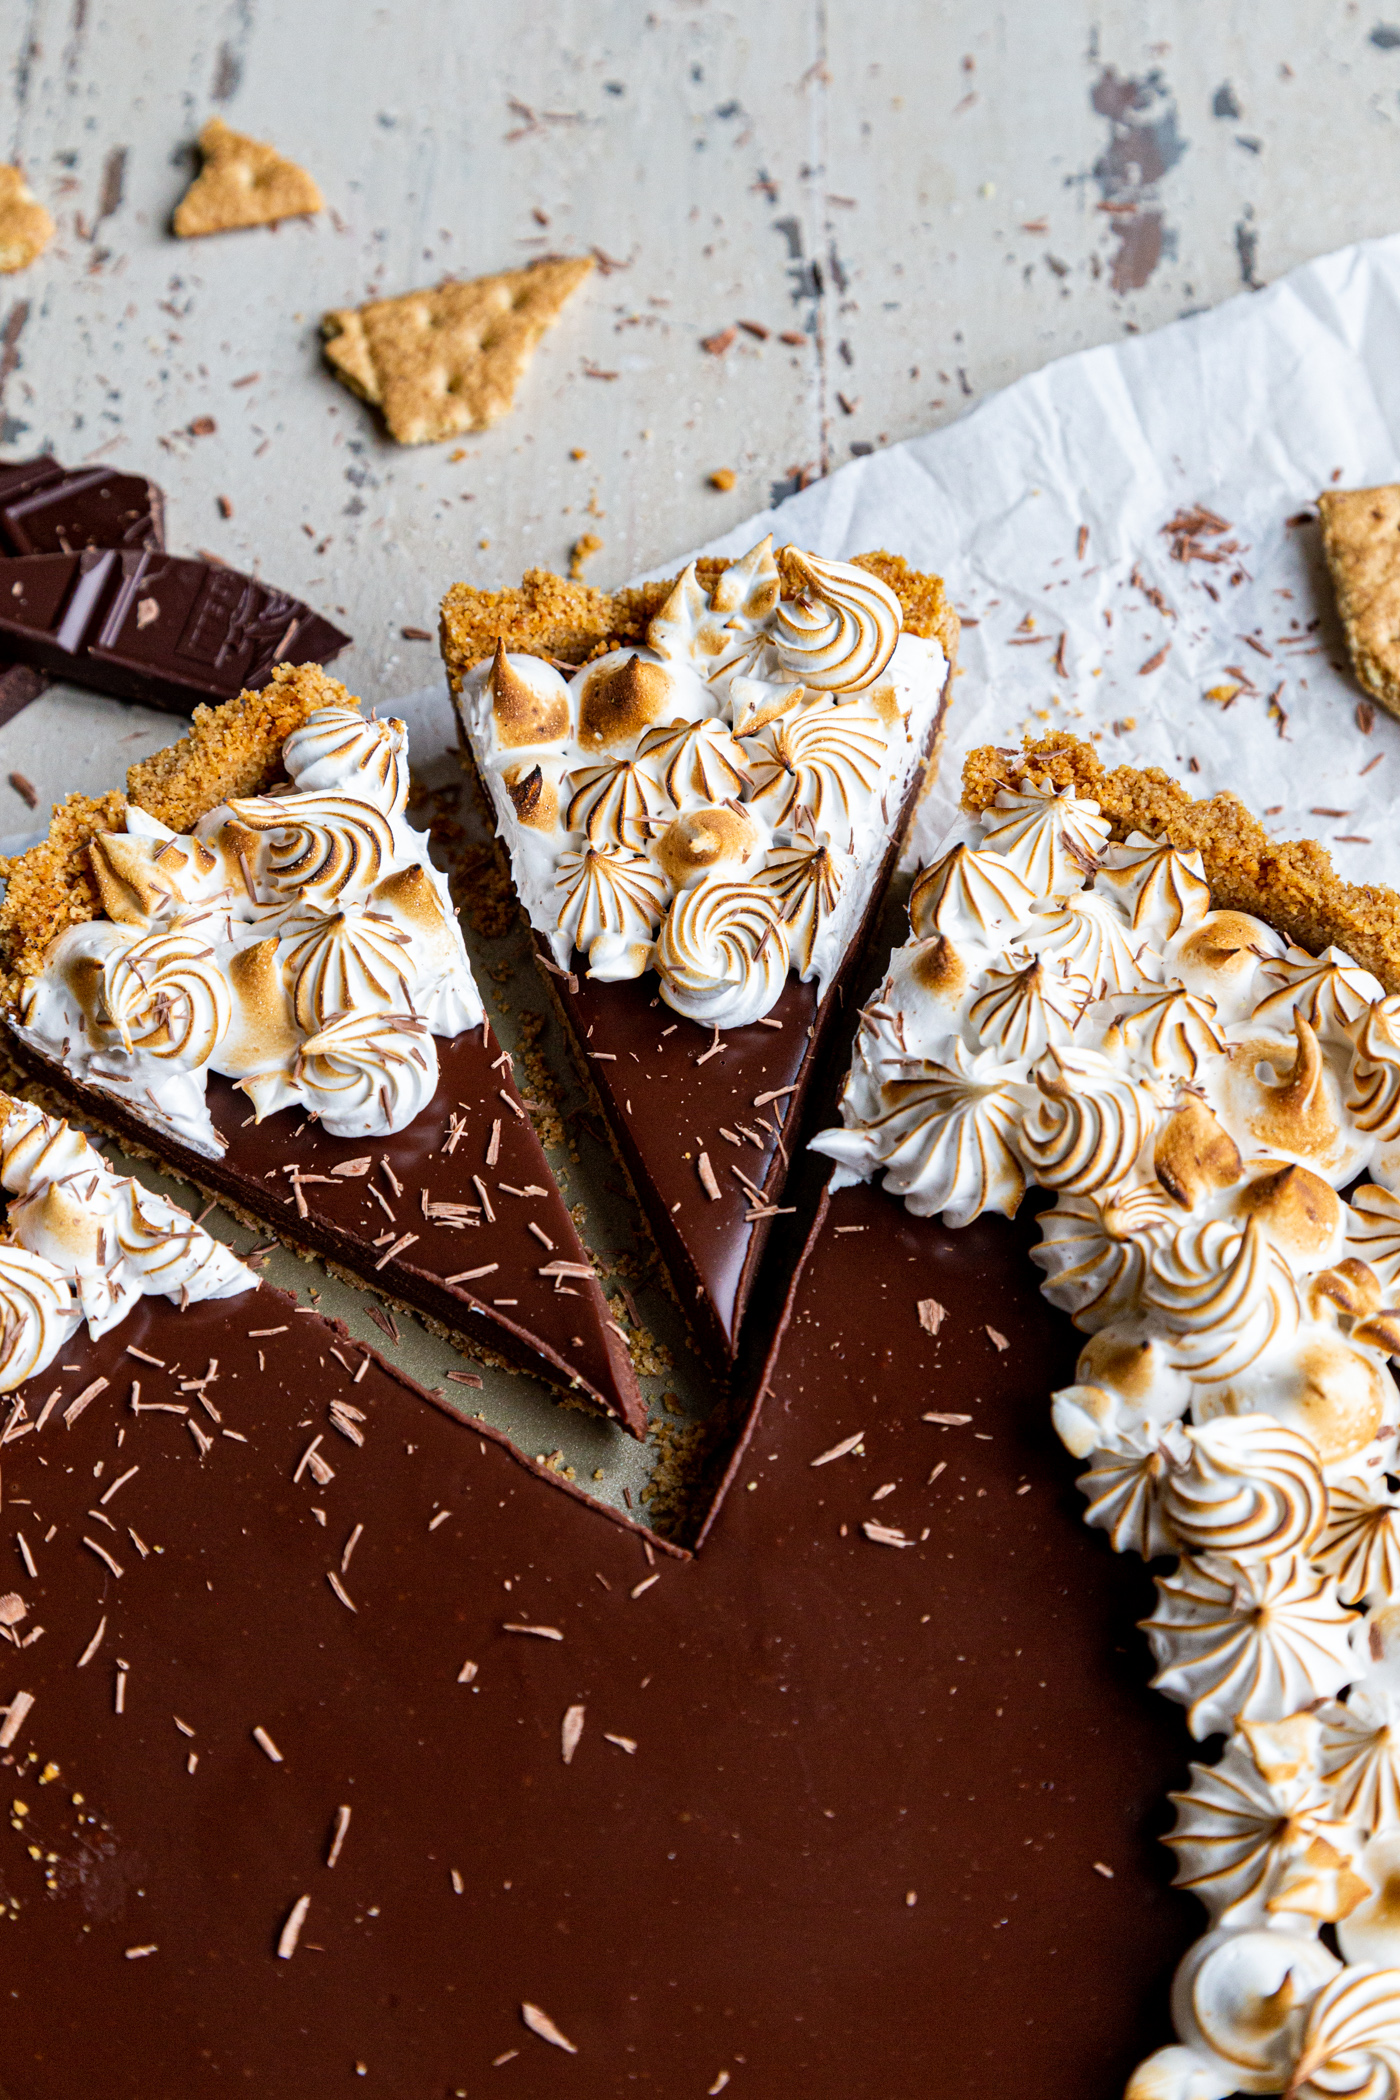 Chocolate s'mores tart with two slices cut out of it with chocolate shavings on top